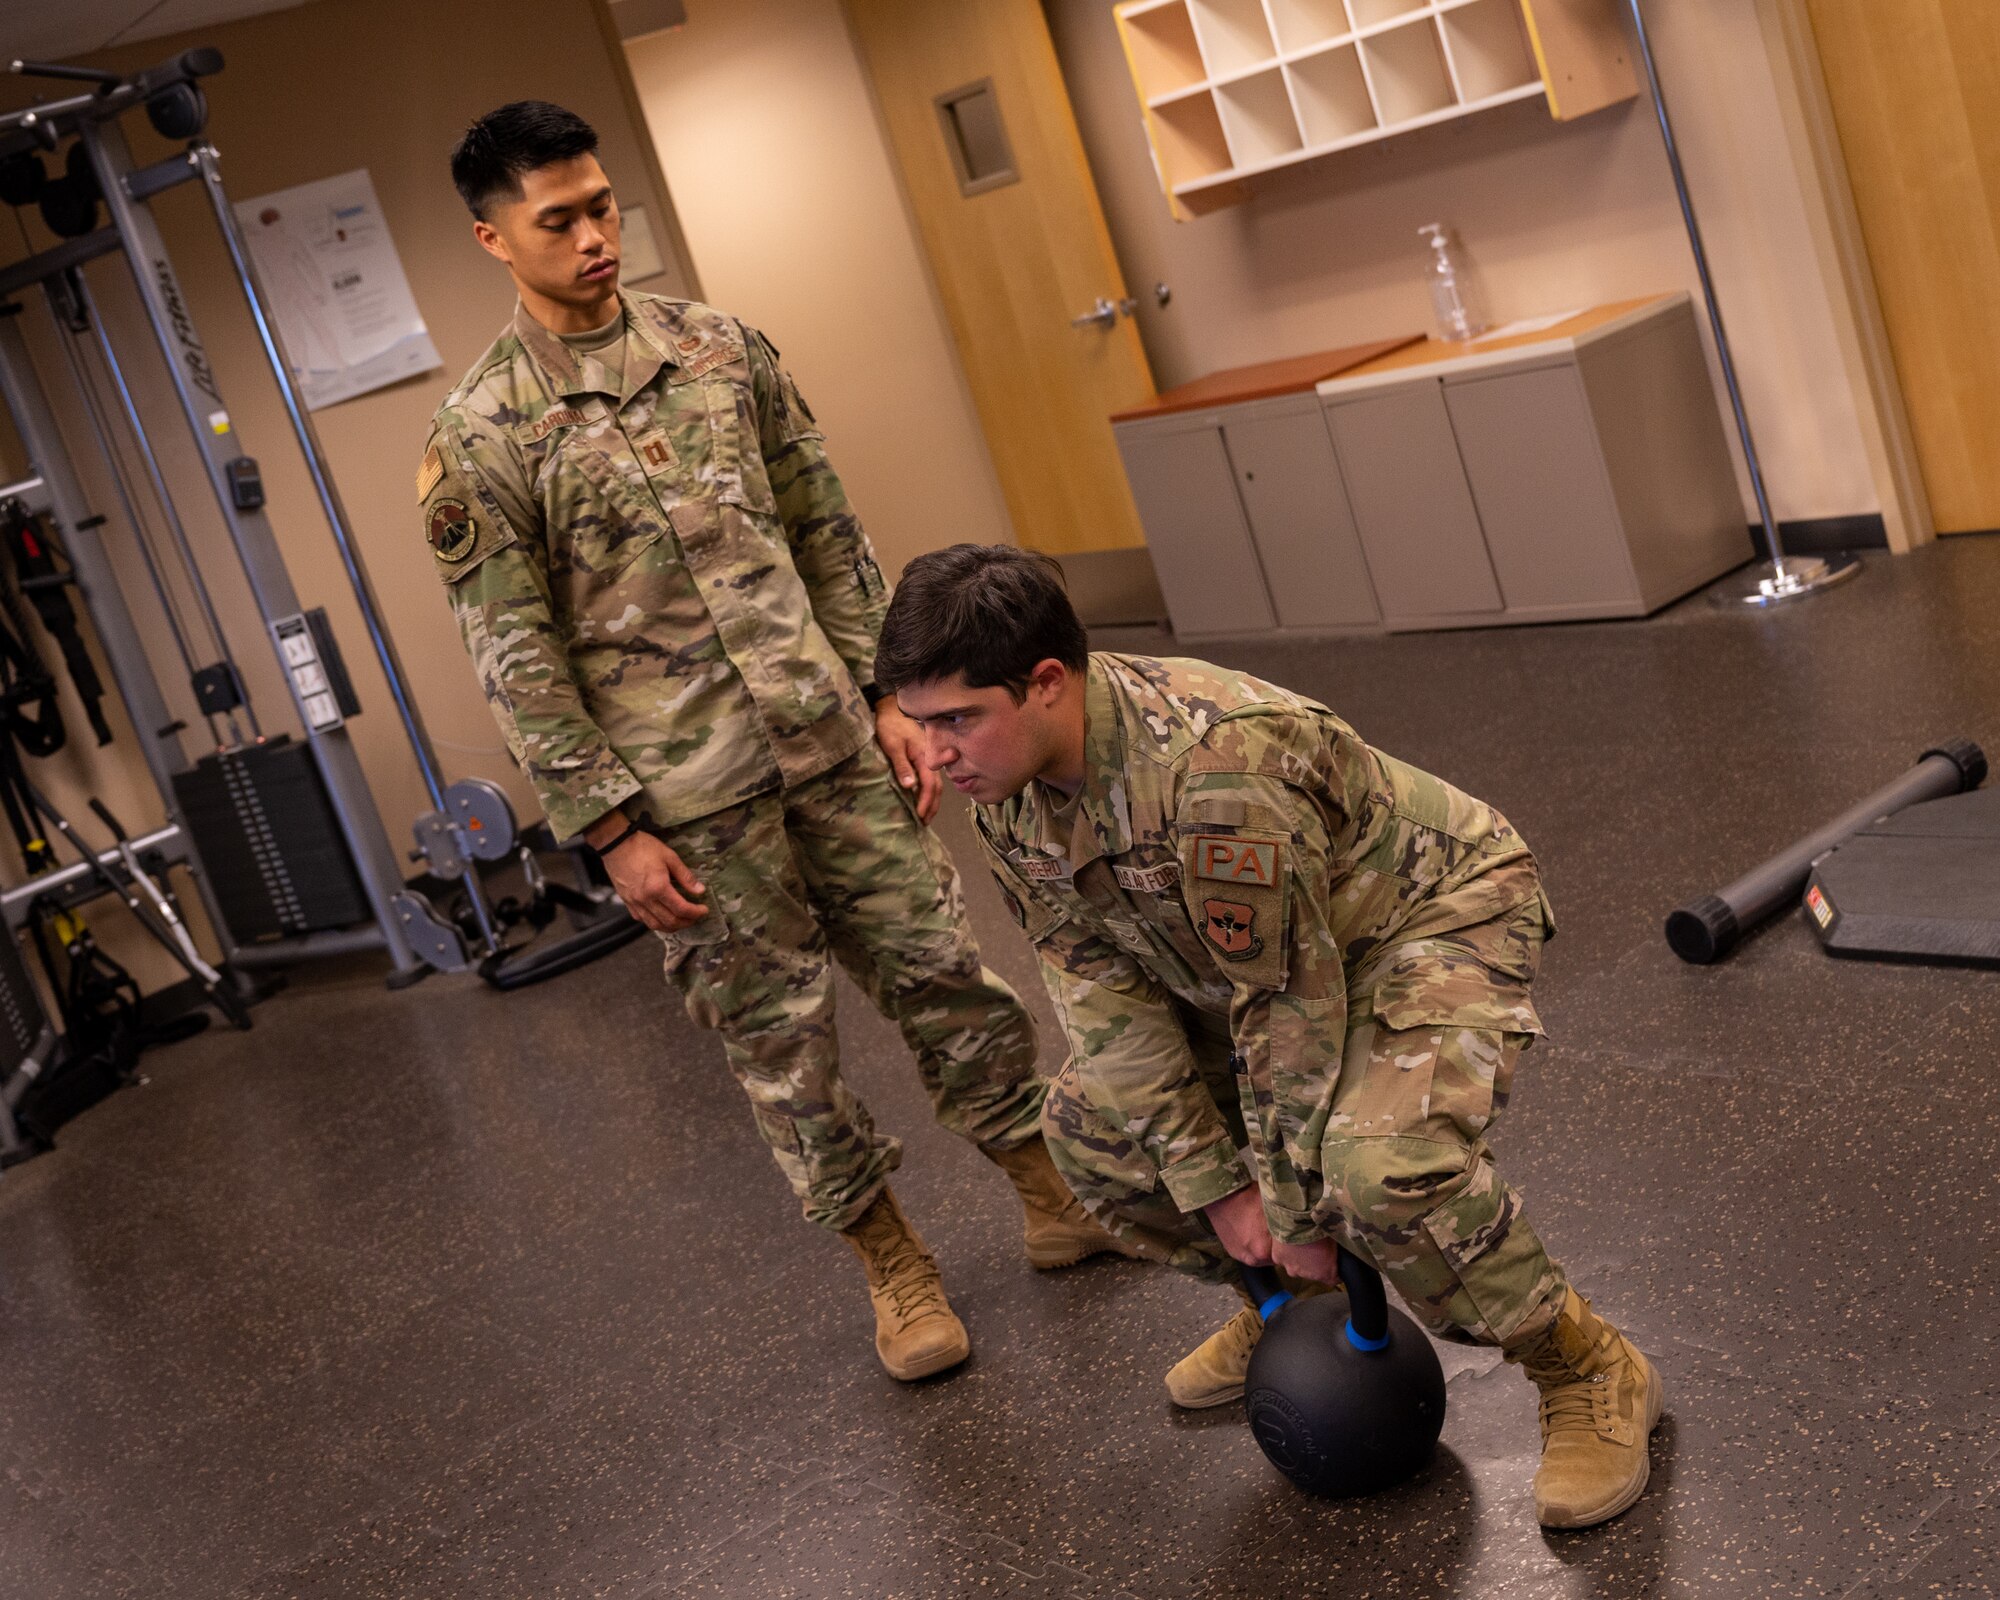 U.S. Air Force Capt. Xavier Cardinal, 56th Medical Group staff physical therapist, coaches U.S. Air Force Airman 1st Class Elias Carrero, 56th Fighter Wing public affairs specialist, on proper deadlift form, June 15, 2023, at Luke Air Force Base, Arizona.